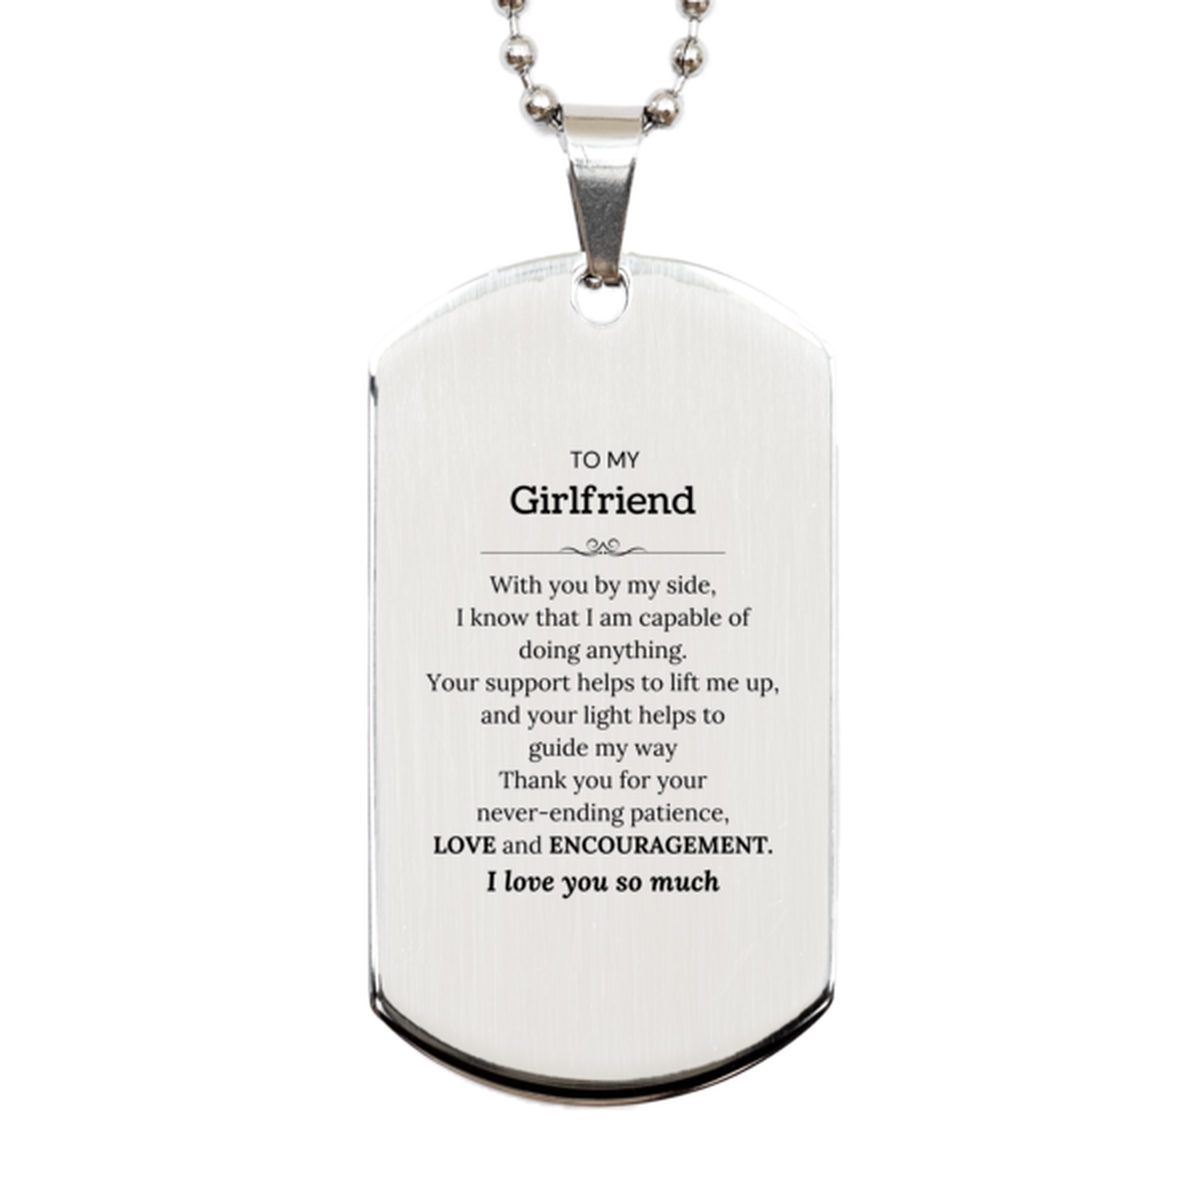 Appreciation Girlfriend Silver Dog Tag Gifts, To My Girlfriend Birthday Christmas Wedding Keepsake Gifts for Girlfriend With you by my side, I know that I am capable of doing anything. I love you so much